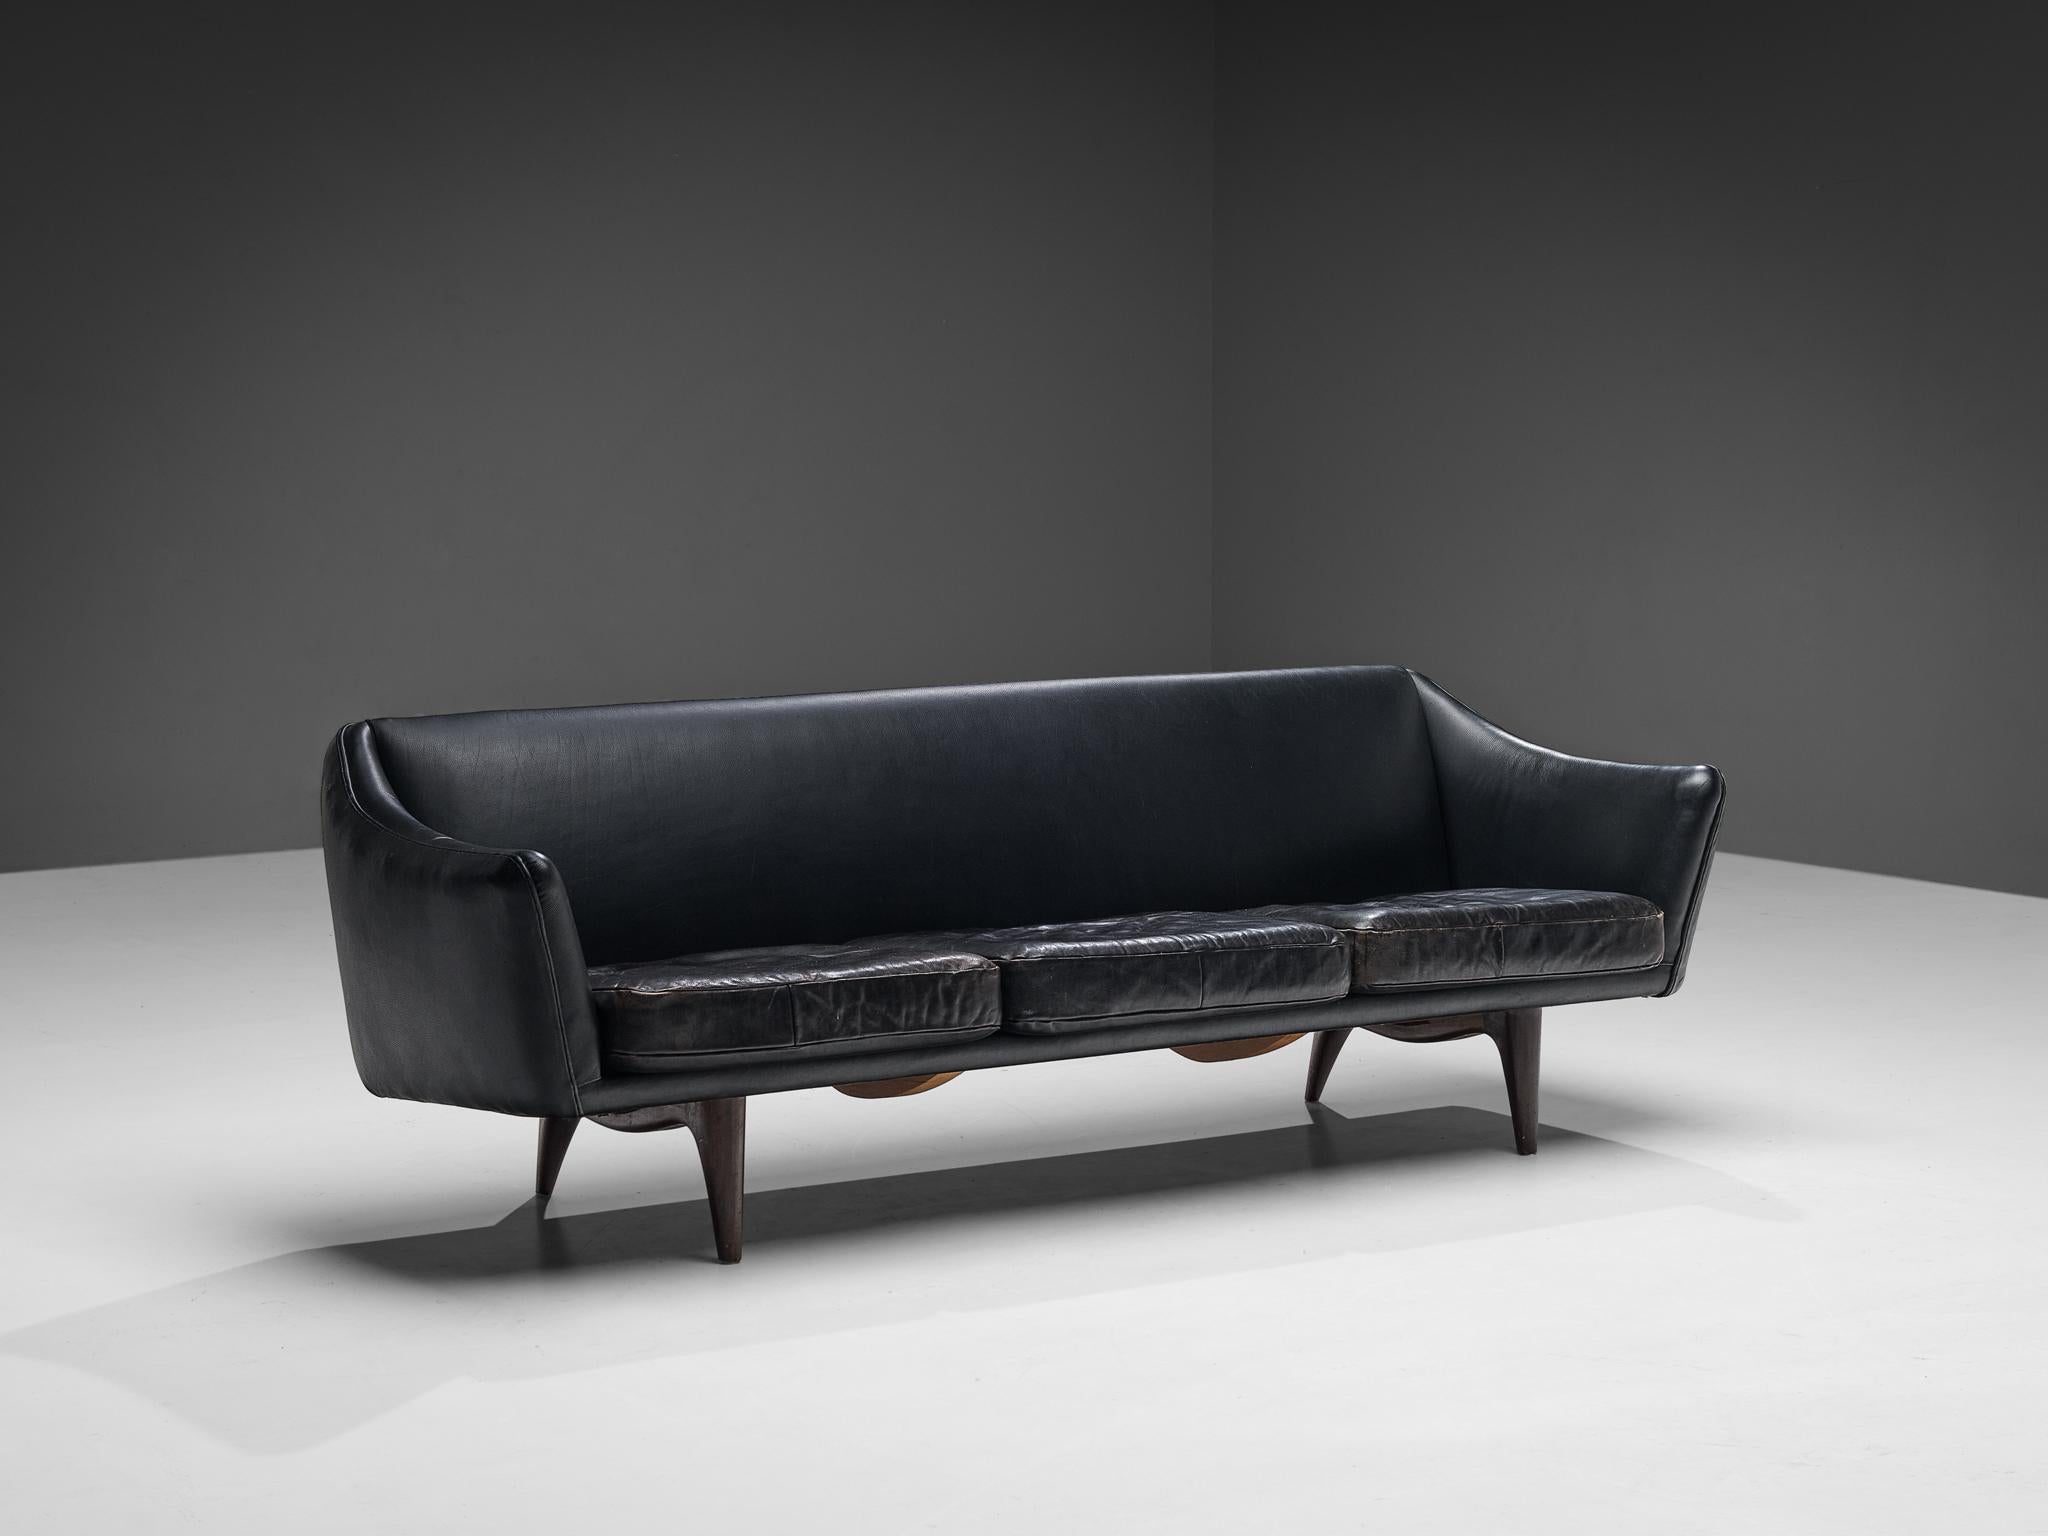 Illum Wikkelsø for A. Mikael Laursen & Søn, sofa, model 'ML-140', leather, mahogany, Denmark, 1950s. 

This sophisticated sofa shows an unusual elegance and great eye for detail, combined with outstanding craftsmanship, which is characteristic for